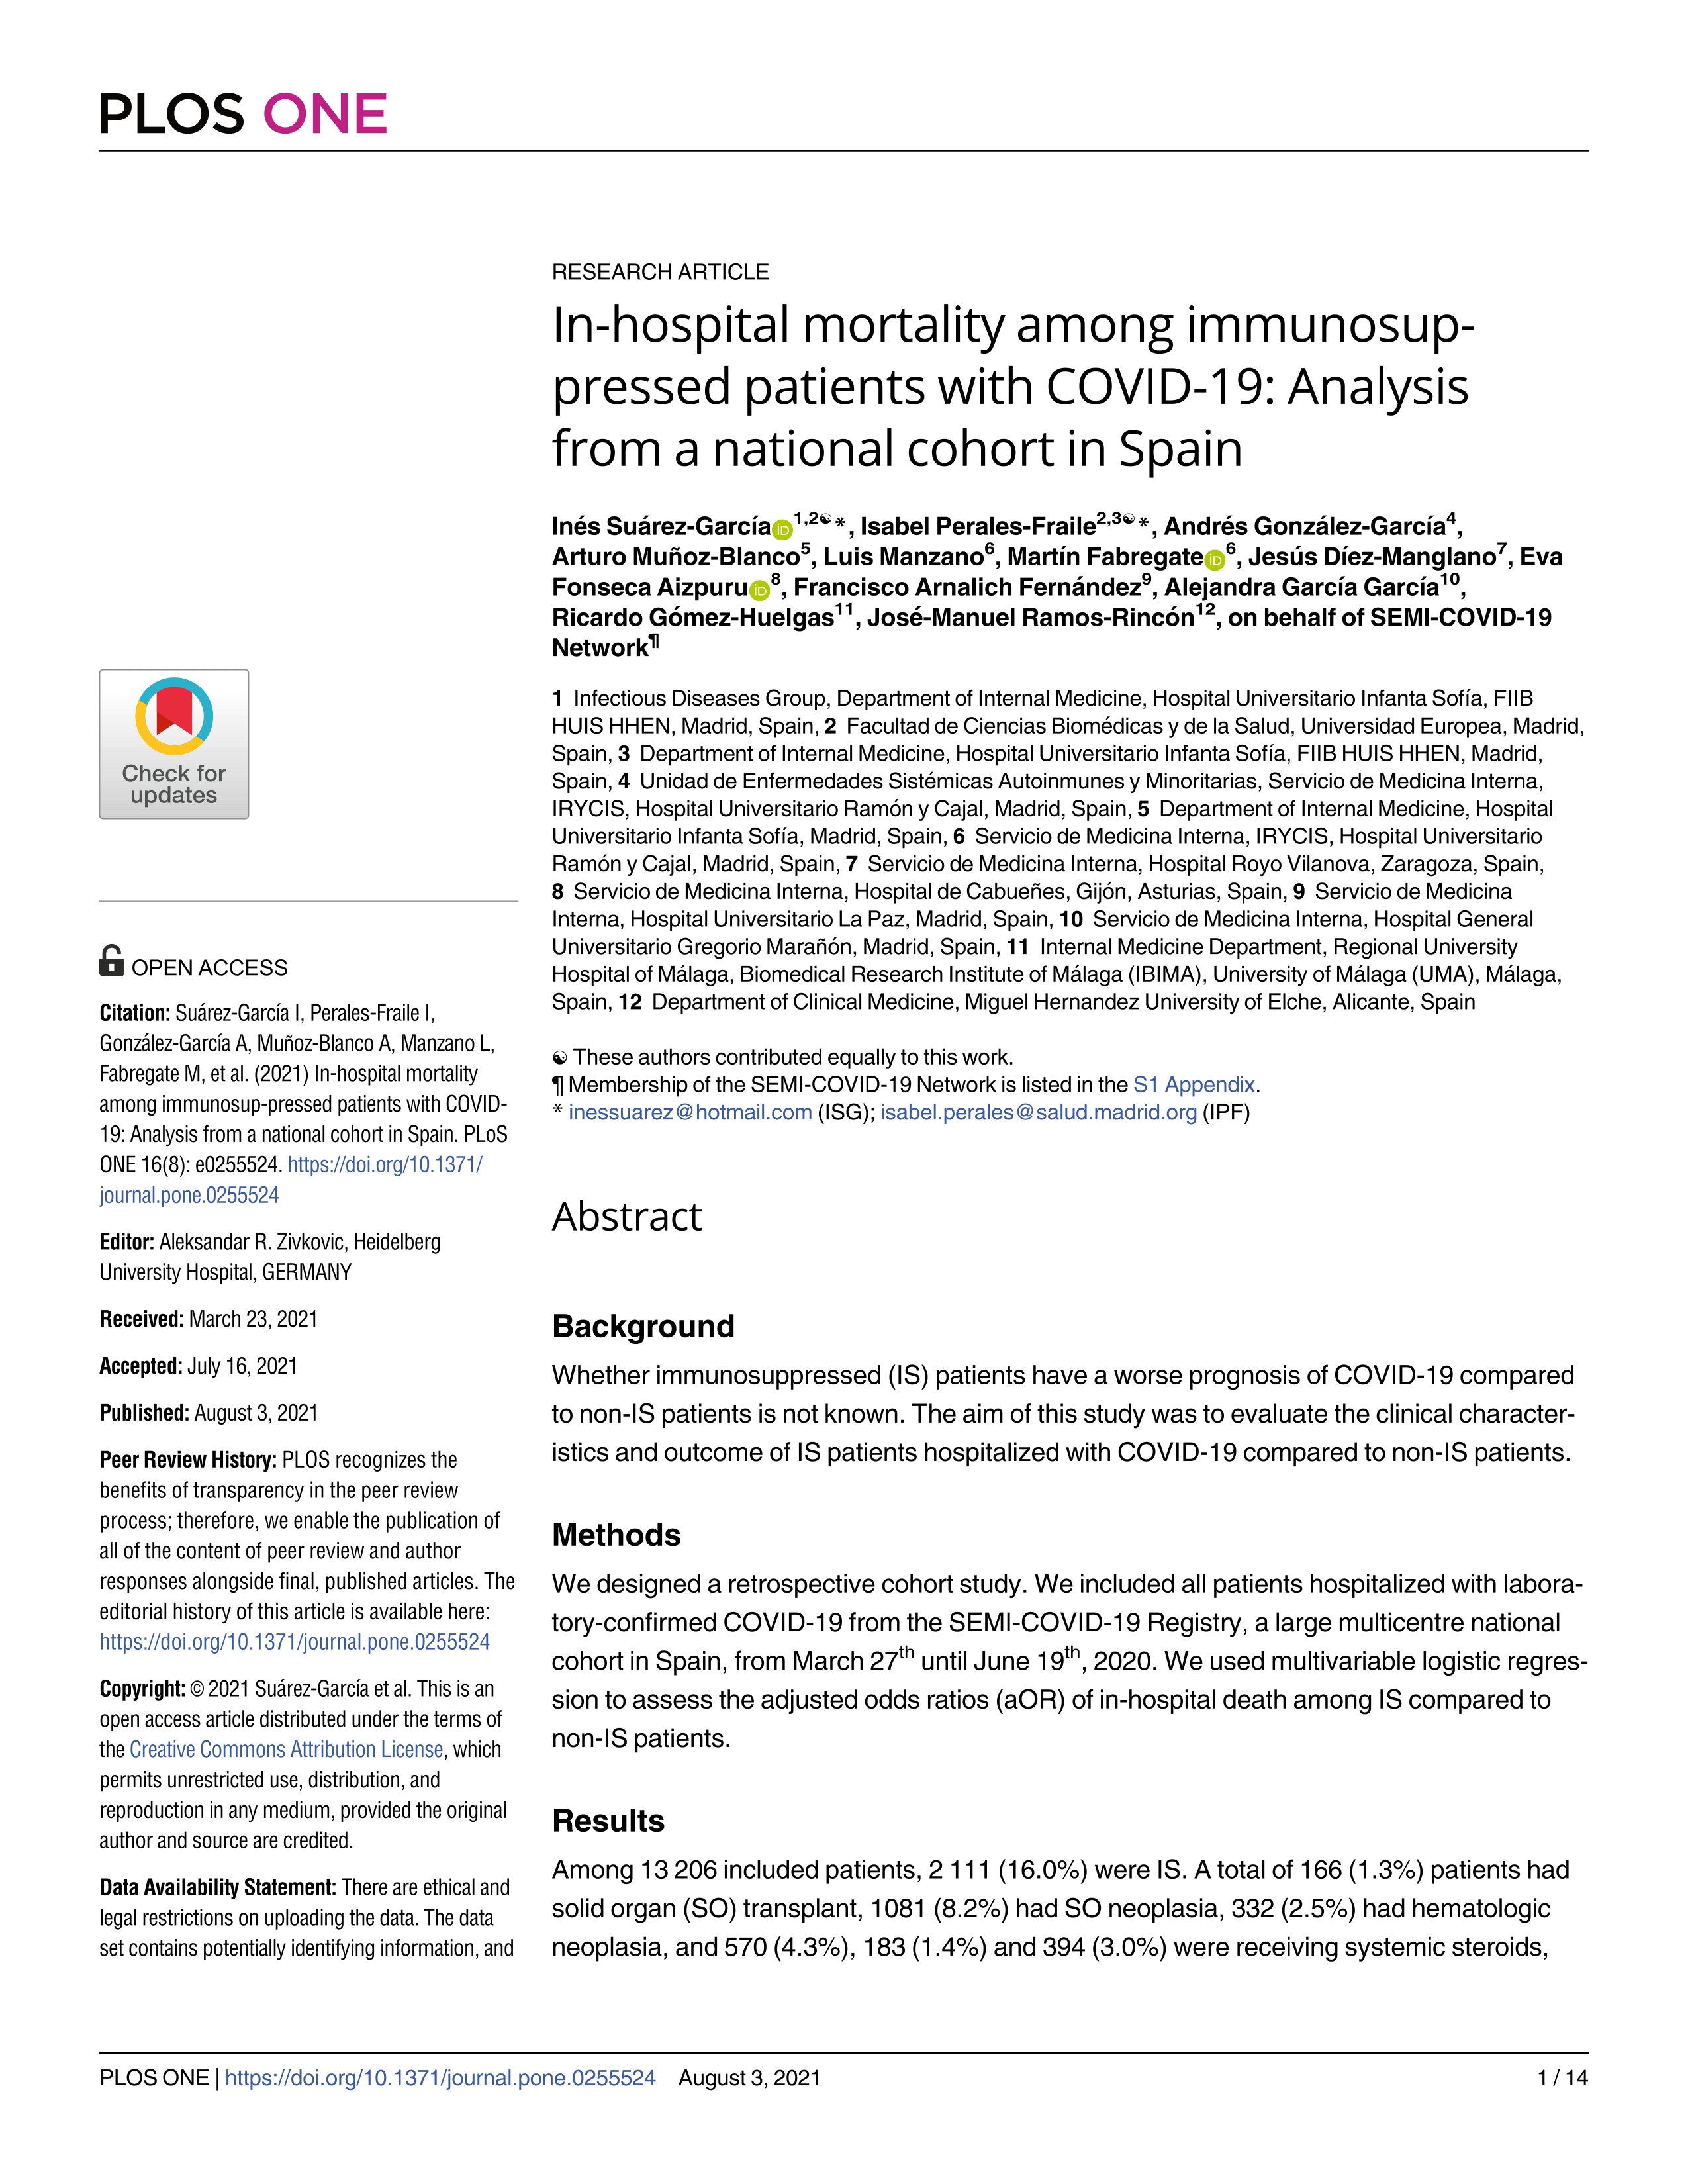 In-hospital mortality among immunosuppressed patients with COVID-19: Analysis from a national cohort in Spain